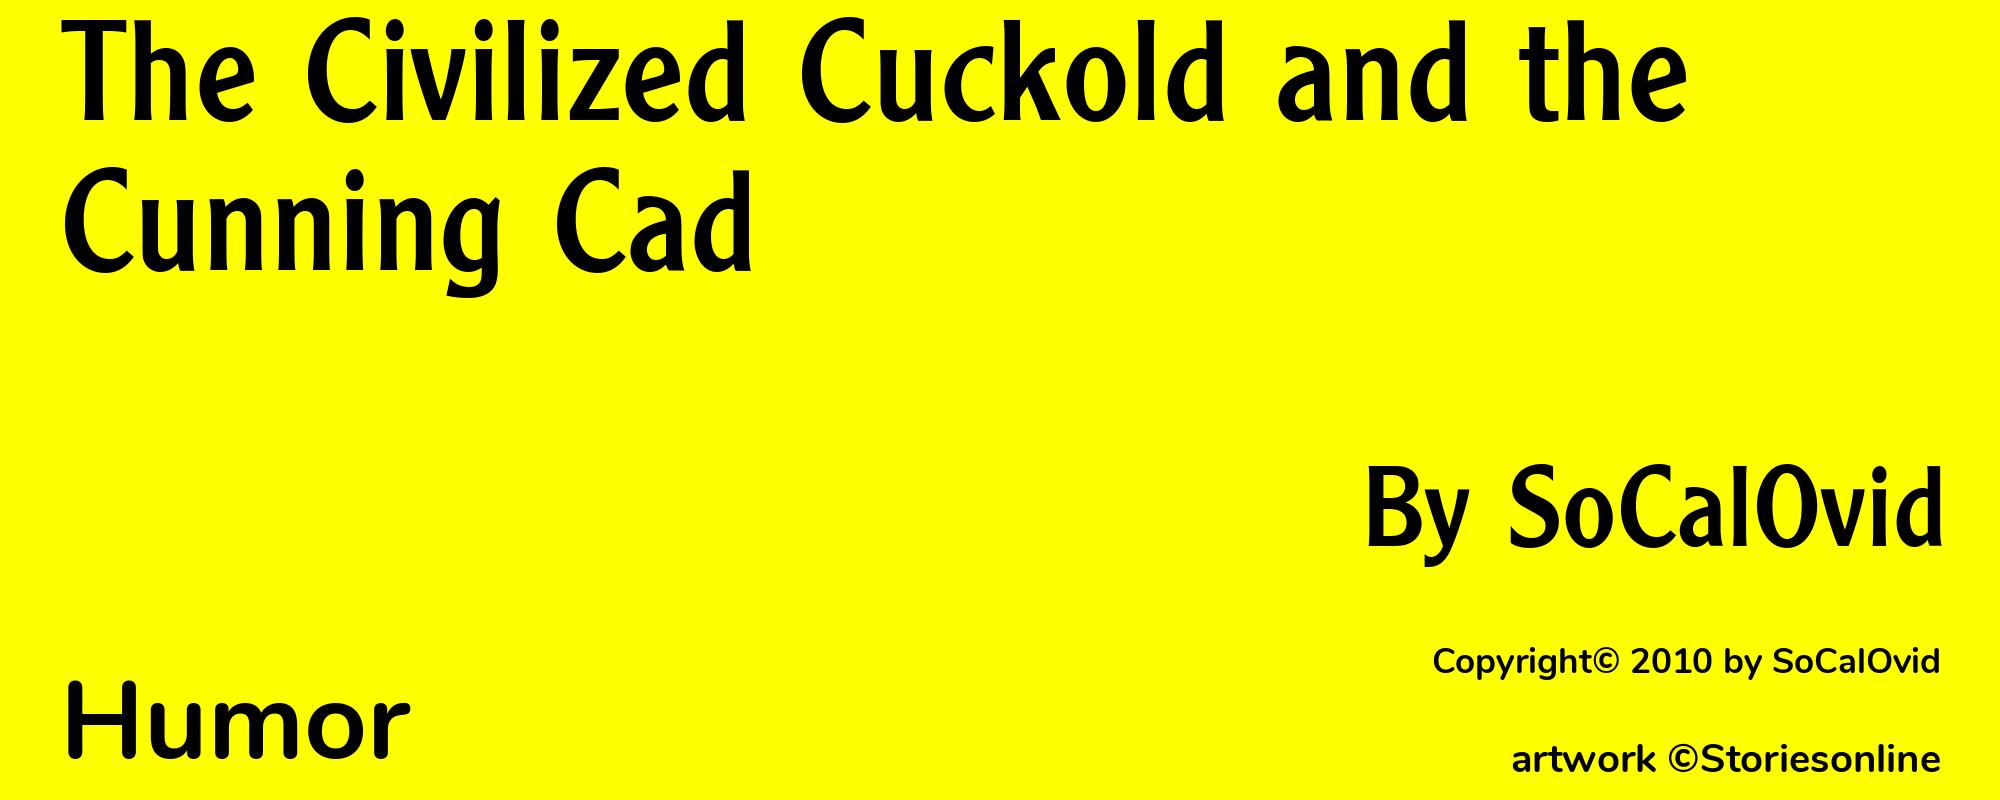 The Civilized Cuckold and the Cunning Cad - Cover